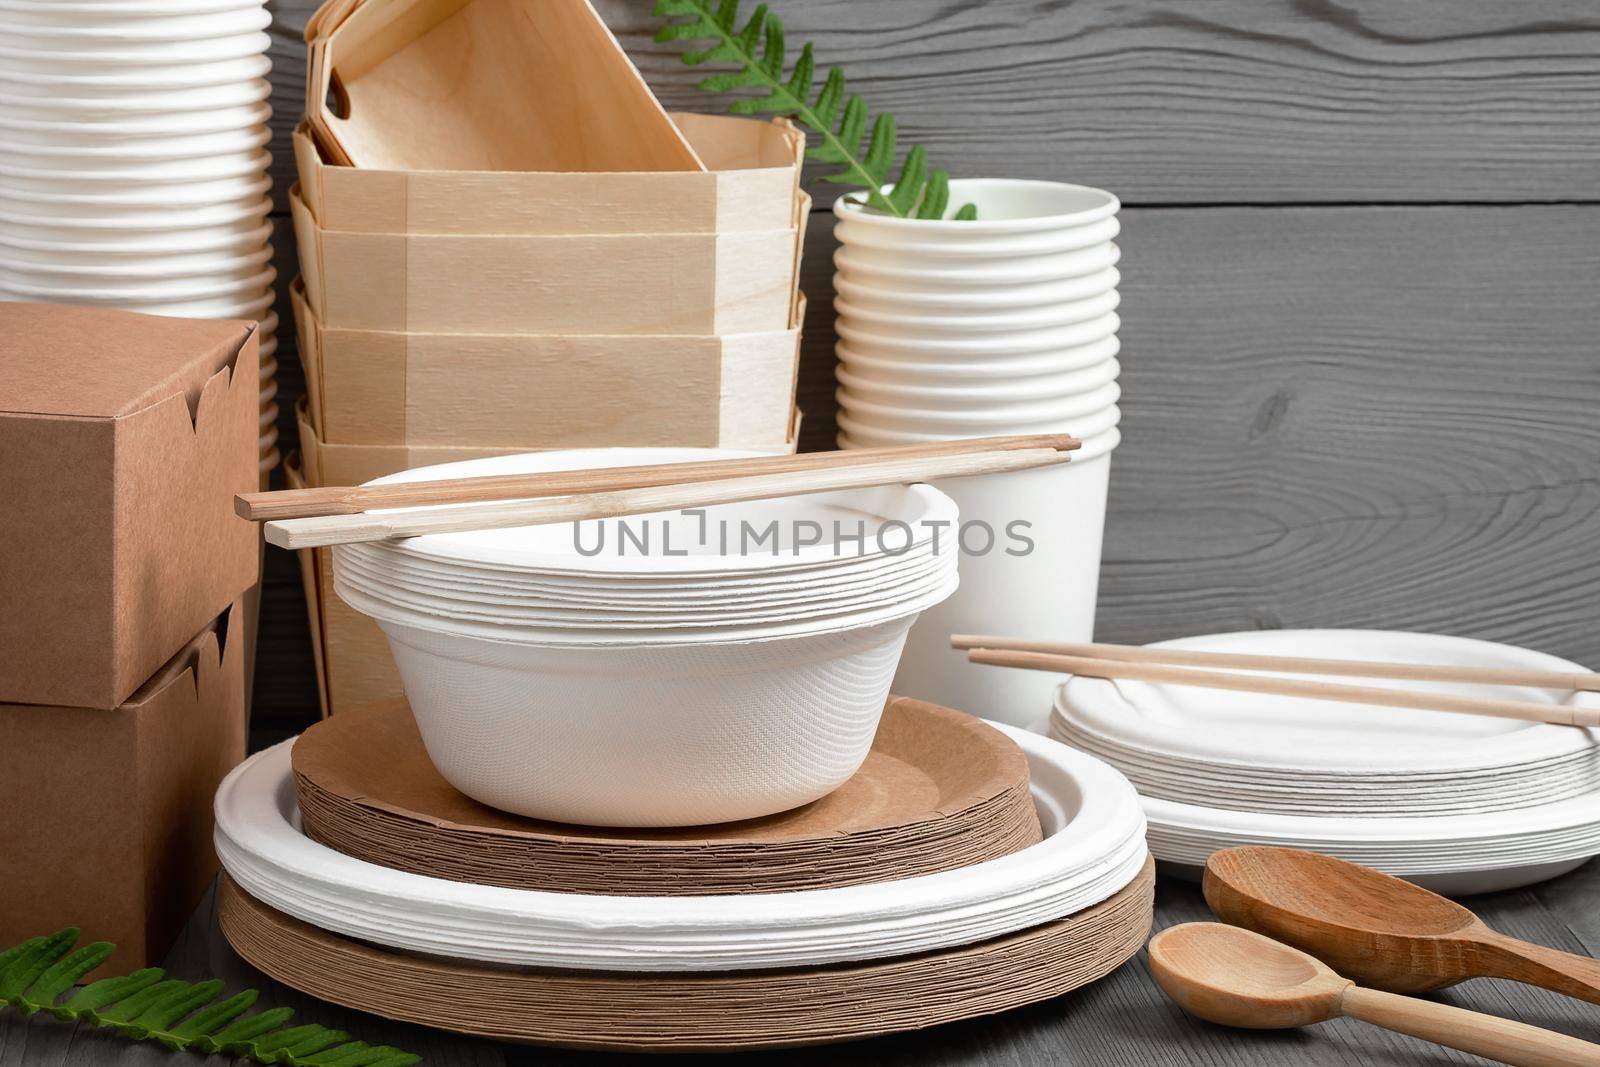 Various Eco friendly tableware made from natural, recyclable materials. Environmental protection and waste reduction concept.